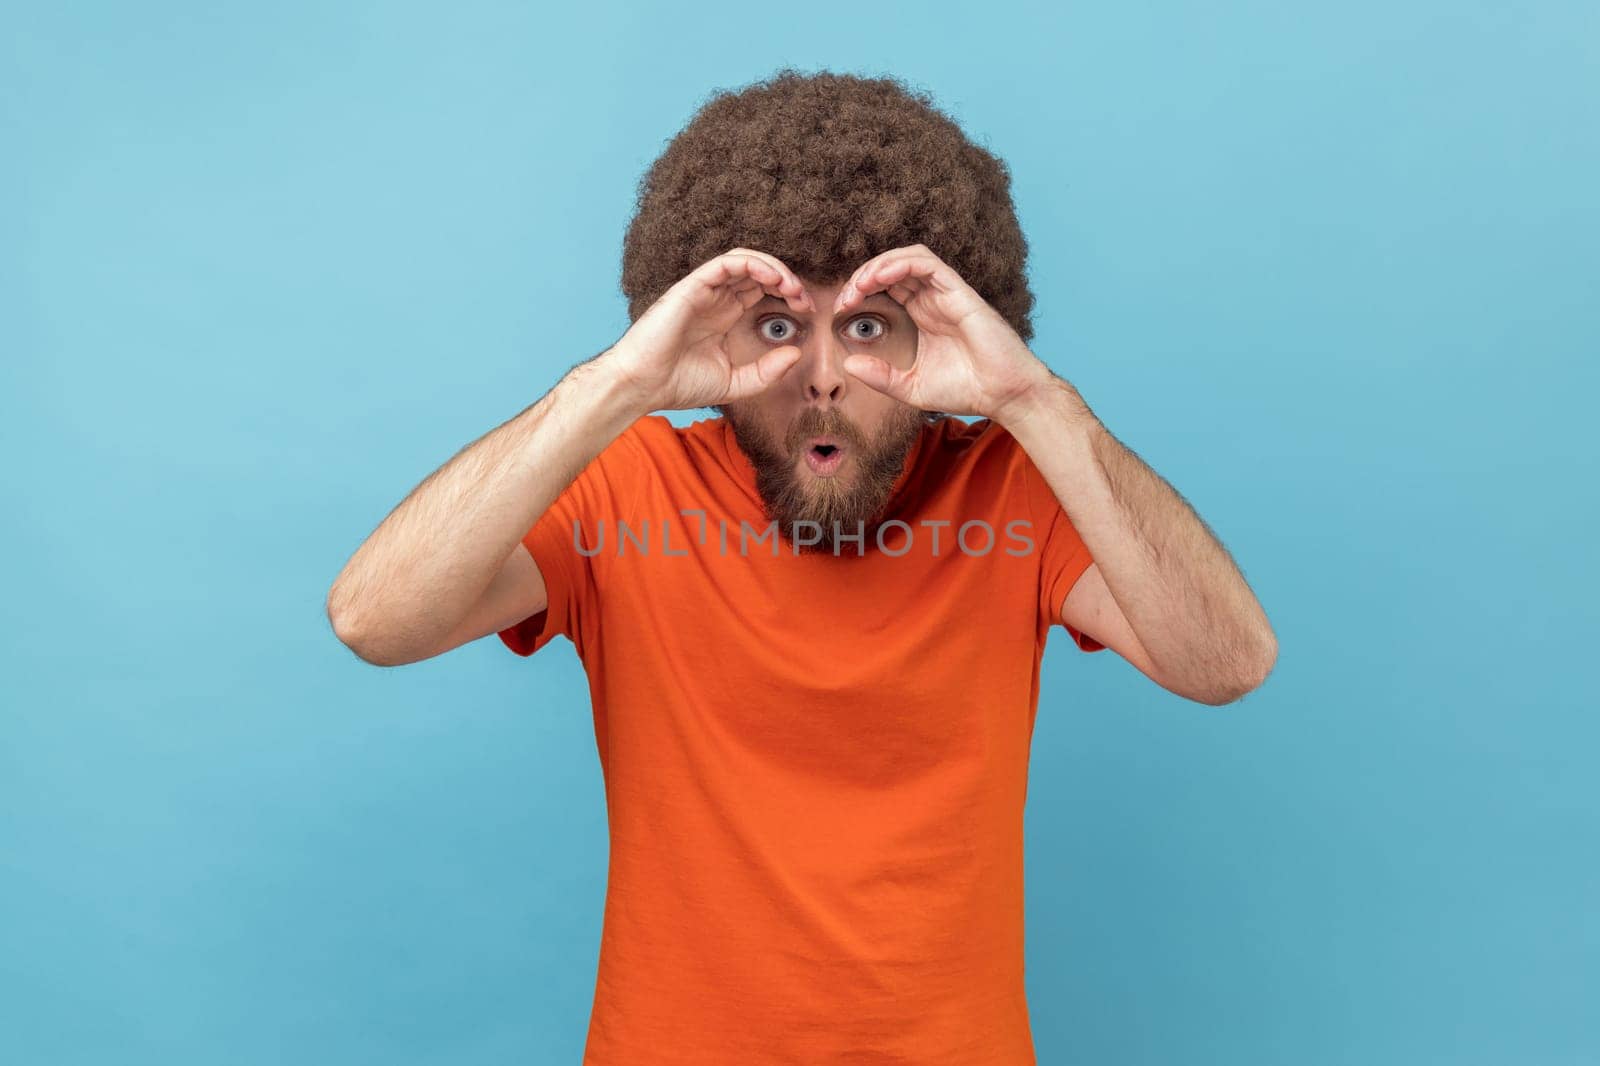 Portrait of man with Afro hairstyle wearing orange T-shirt holding fists near eyes imagining binoculars and looking through holes, spying, having fun. Indoor studio shot isolated on blue background.